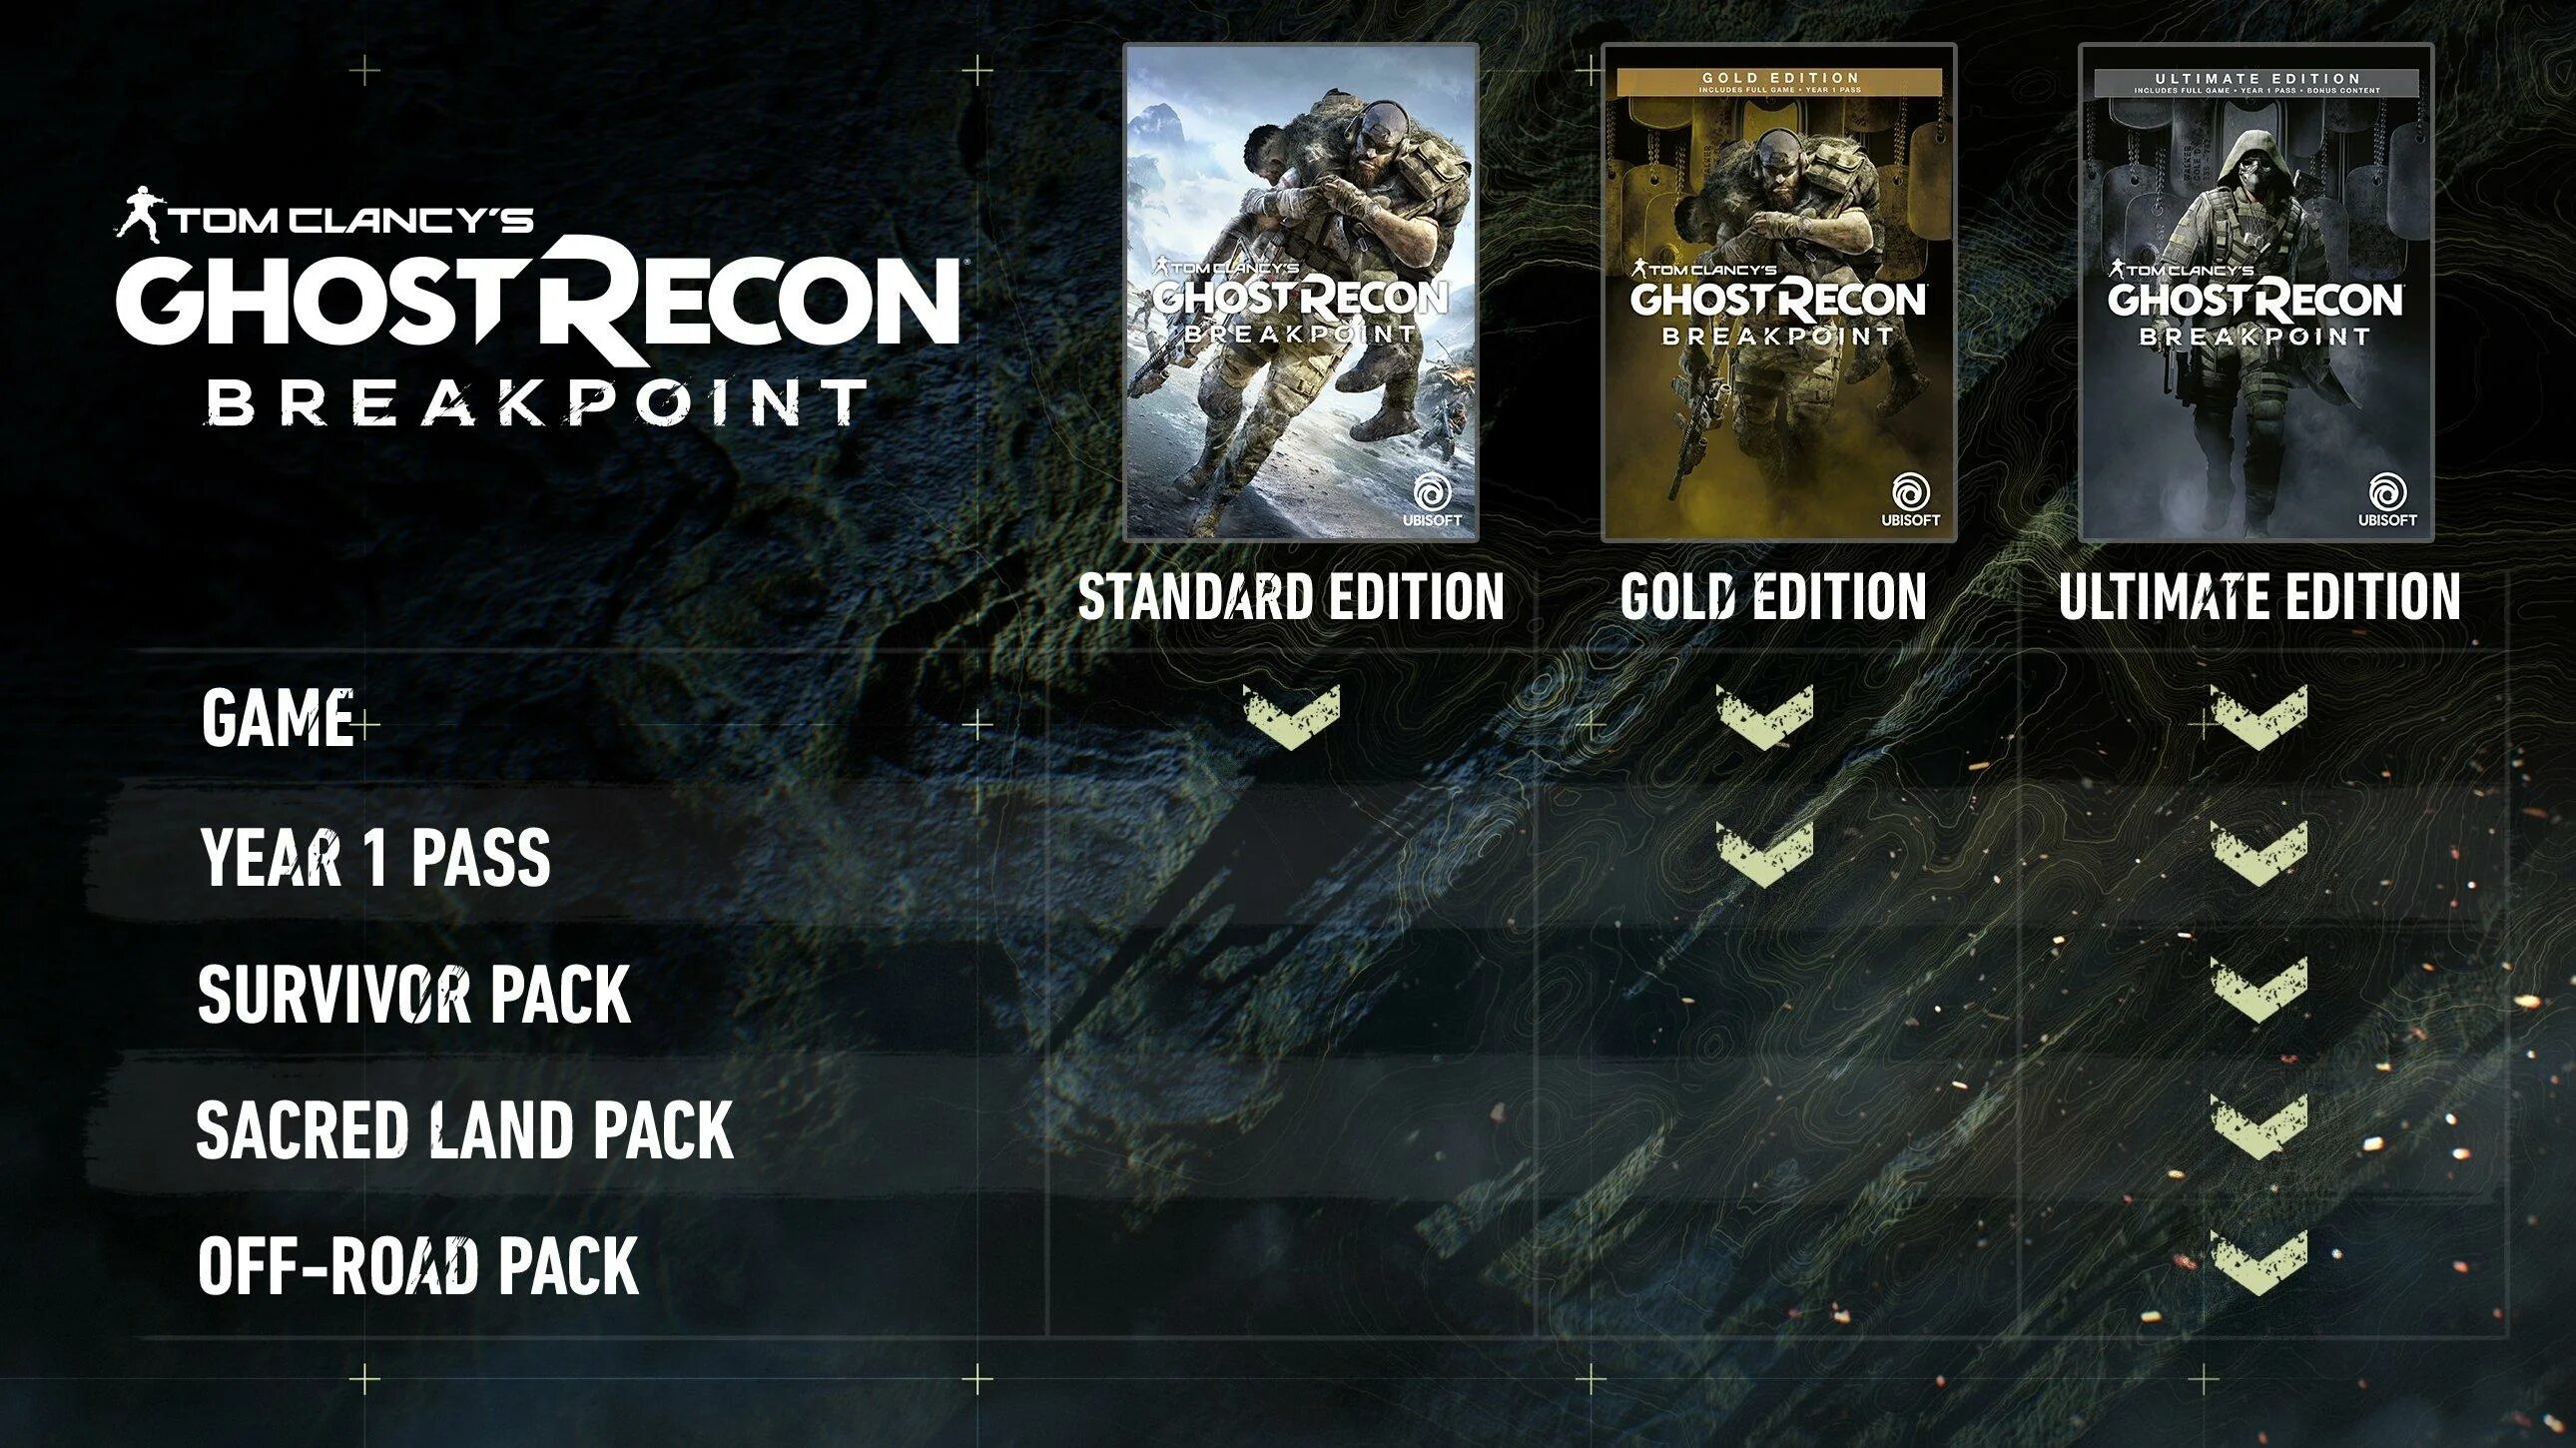 Tom Clancy's Ghost Recon® breakpoint Gold Edition. Tom Clancy s Ghost Recon breakpoint Ultimate Edition. Tom Clancy's Ghost Recon breakpoint Gold Edition ps4. Ghost Recon breakpoint Deluxe Edition. Tom clancy s breakpoint ключ